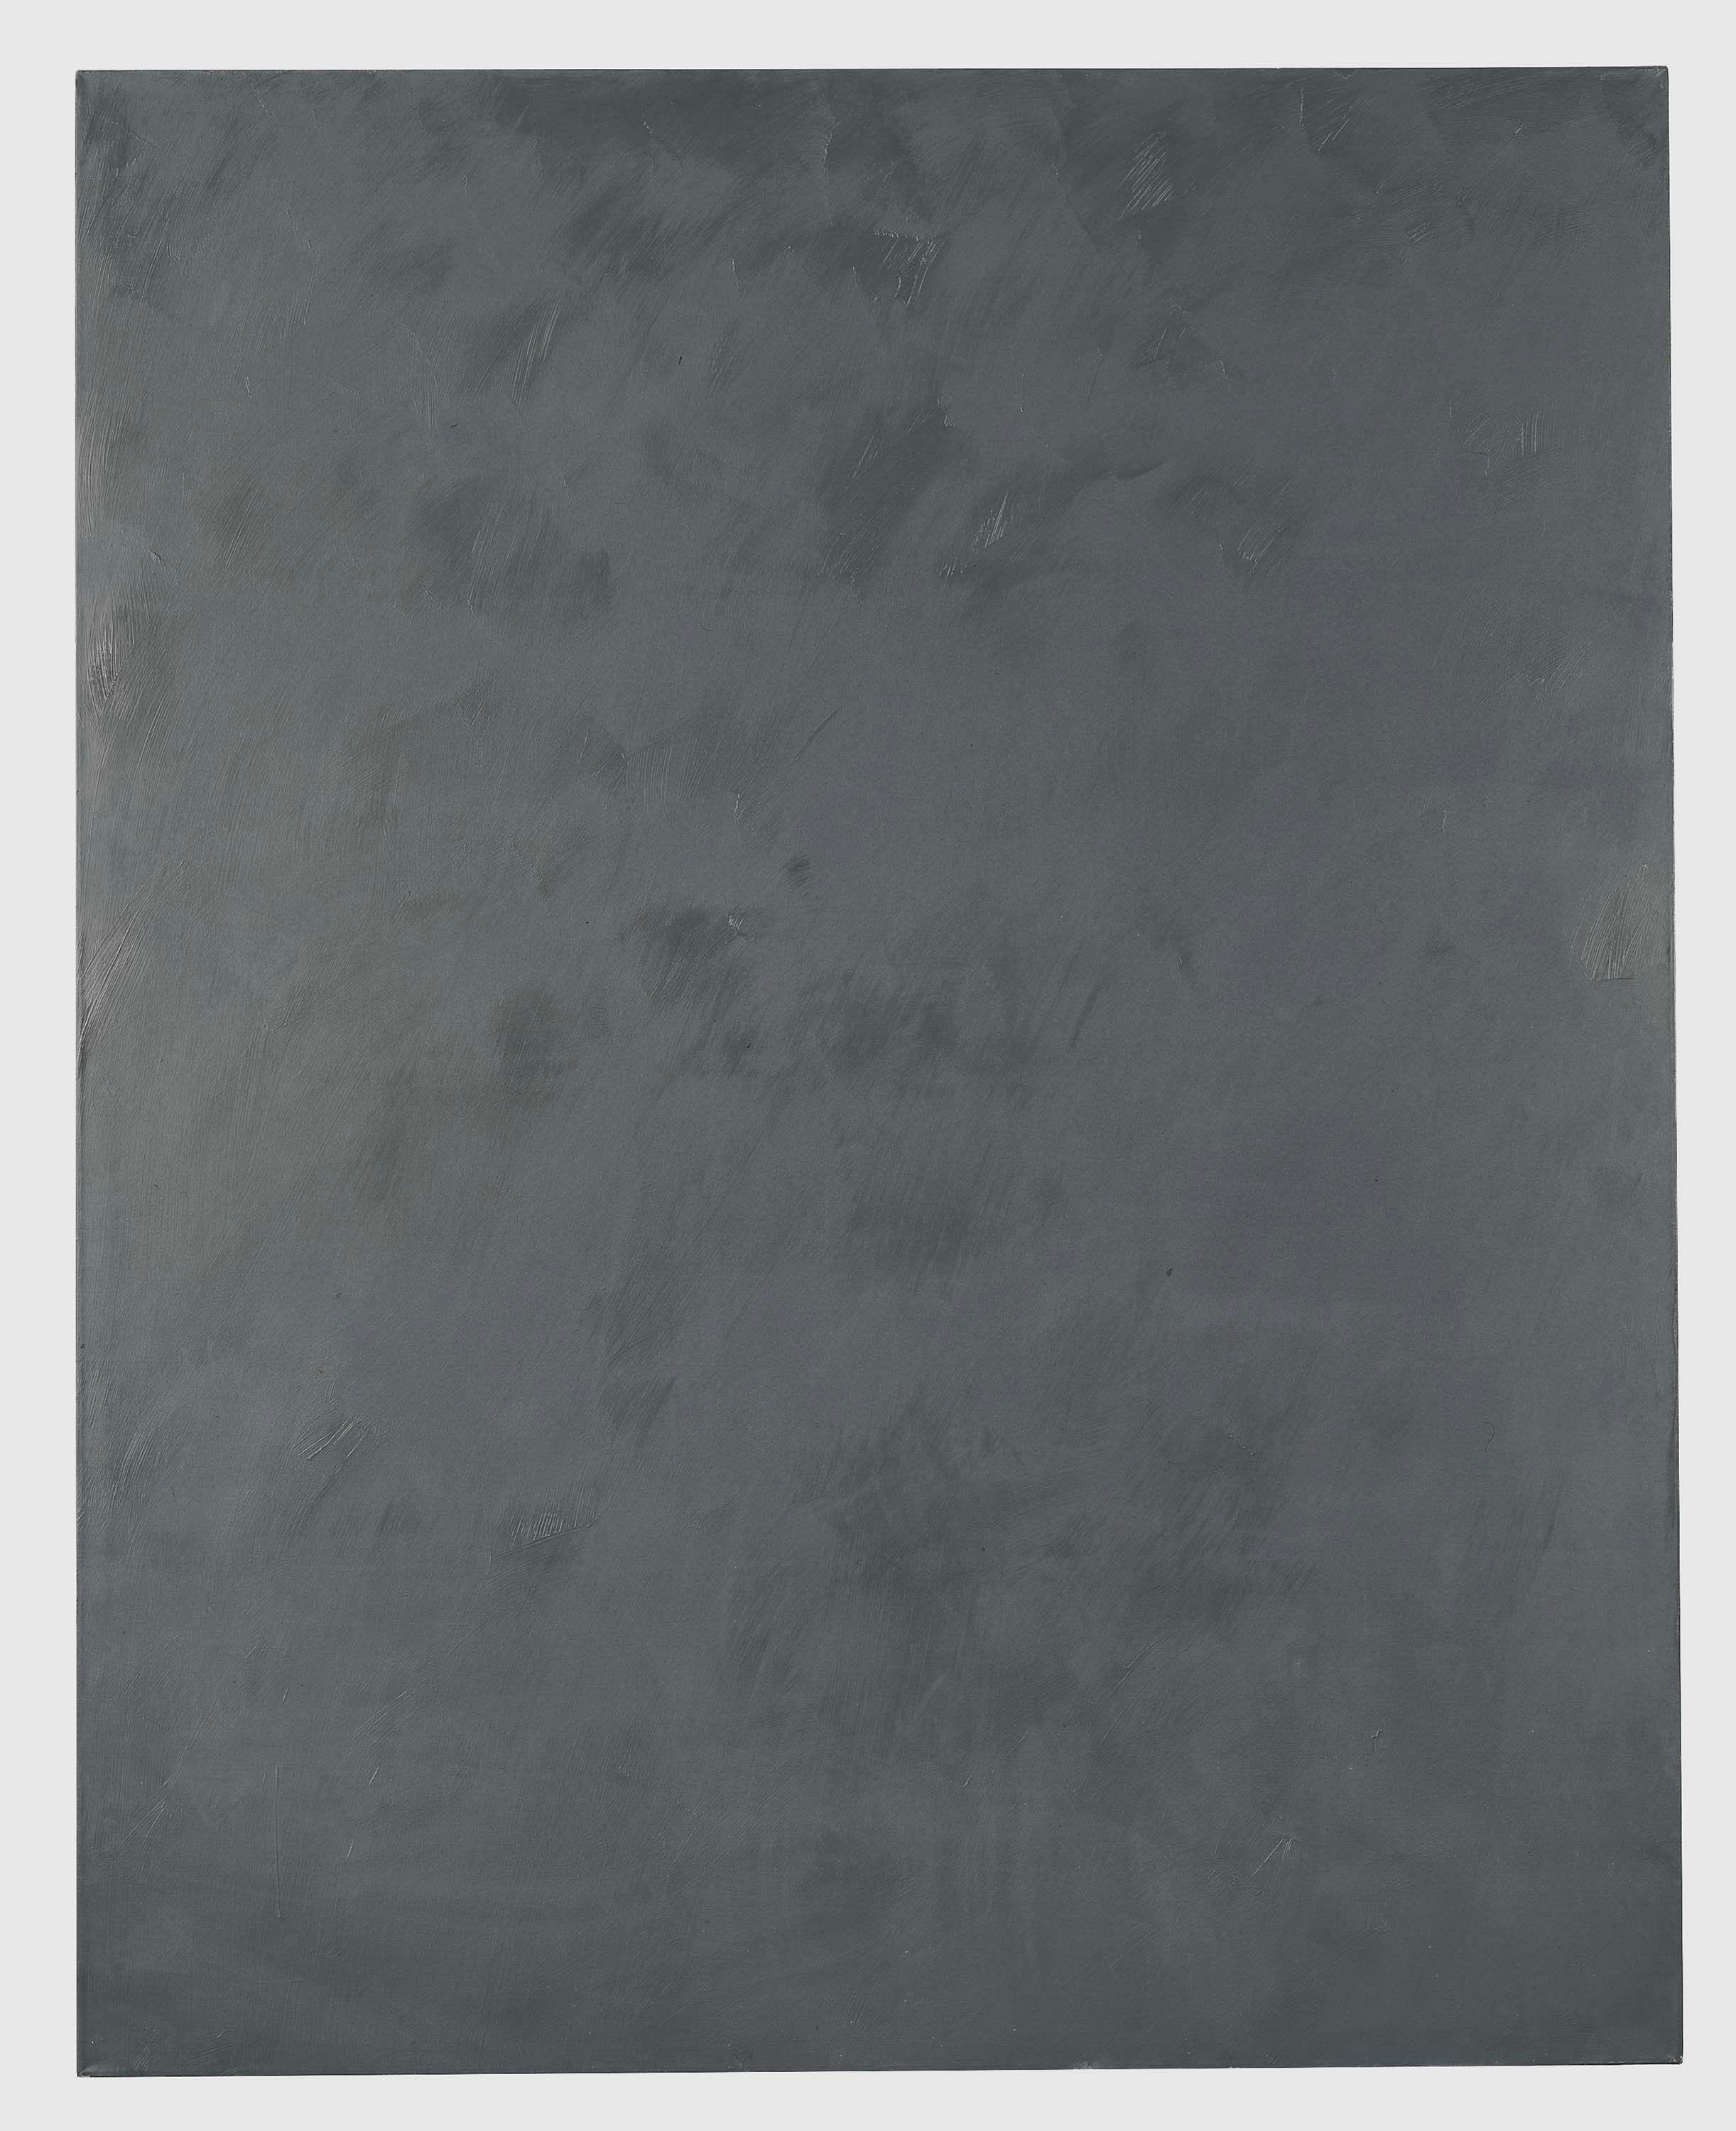 A painting by Gerhard Richter, titled Grau (Gray), dated 1974.